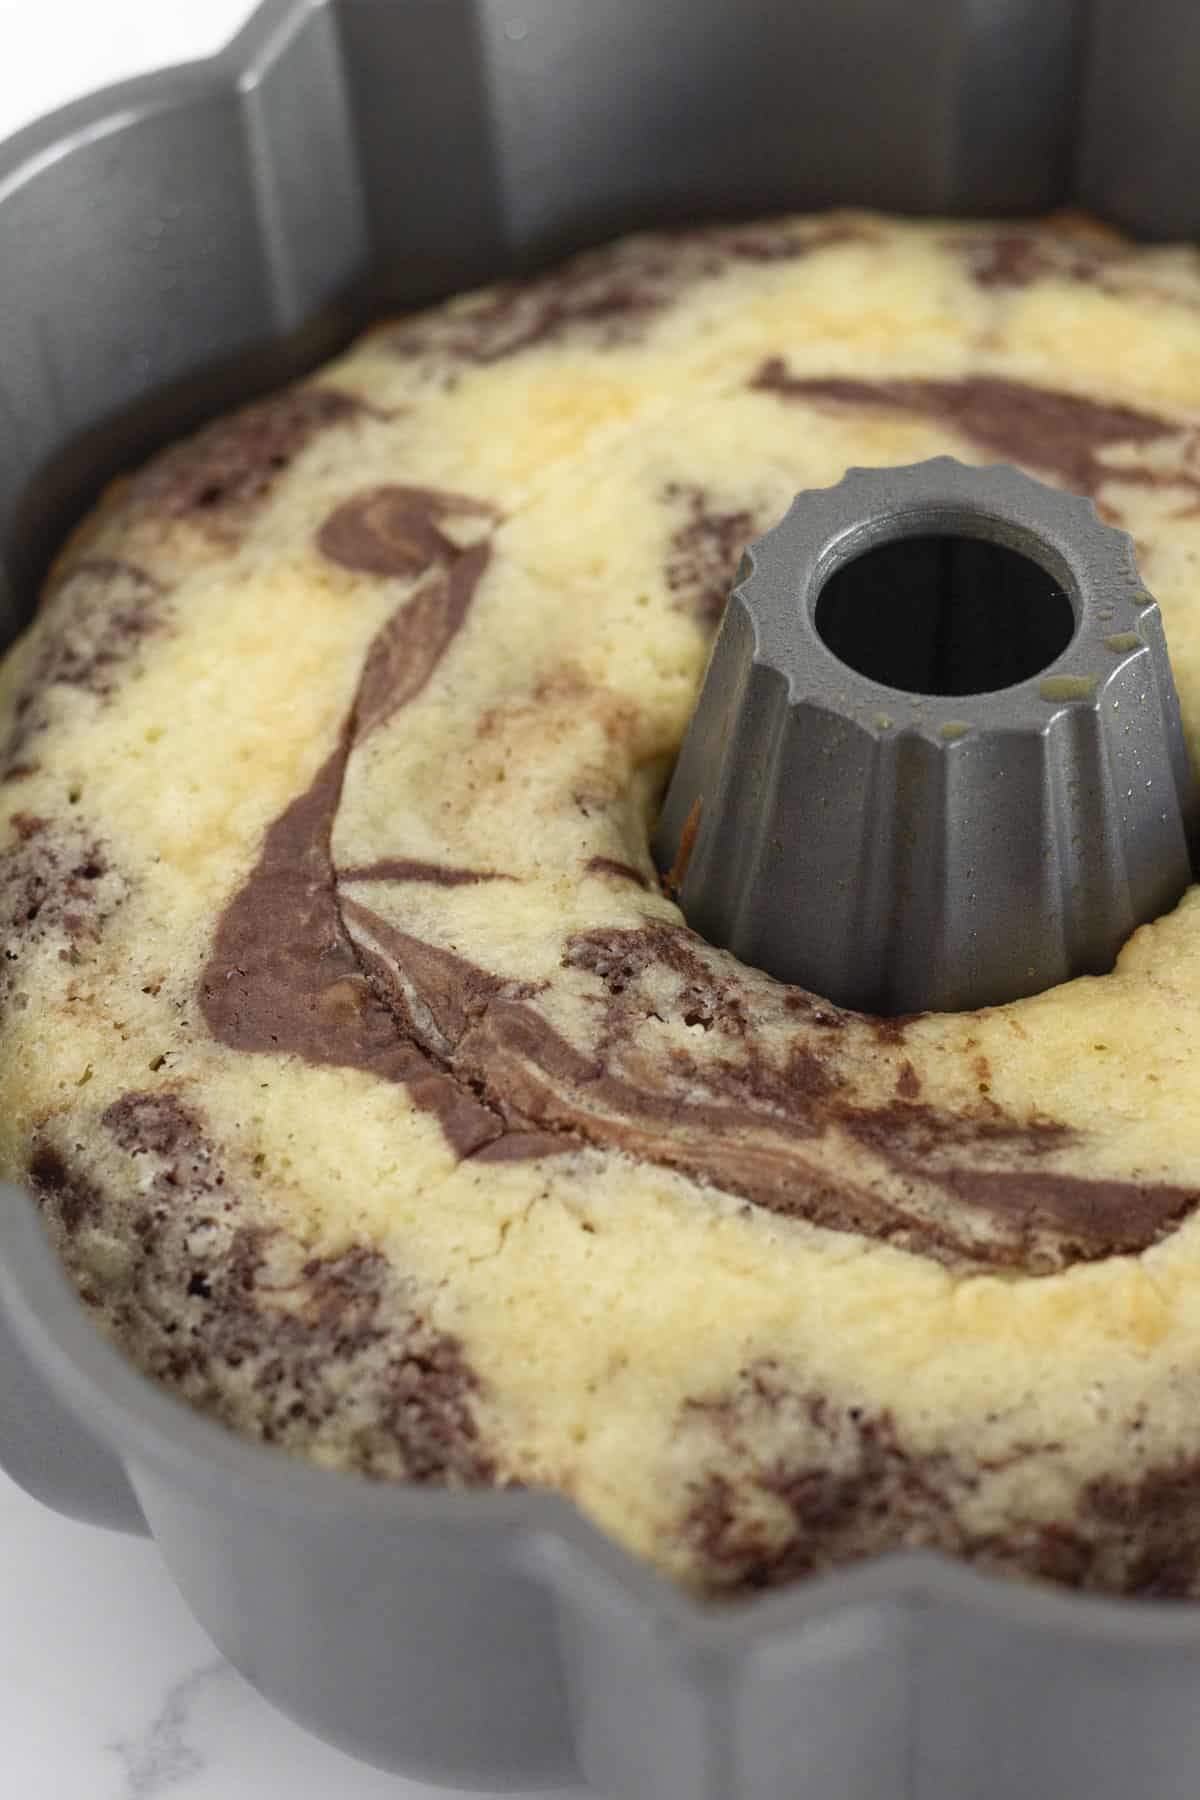 A marble cake in a bundt pan cooling for 10 minutes.